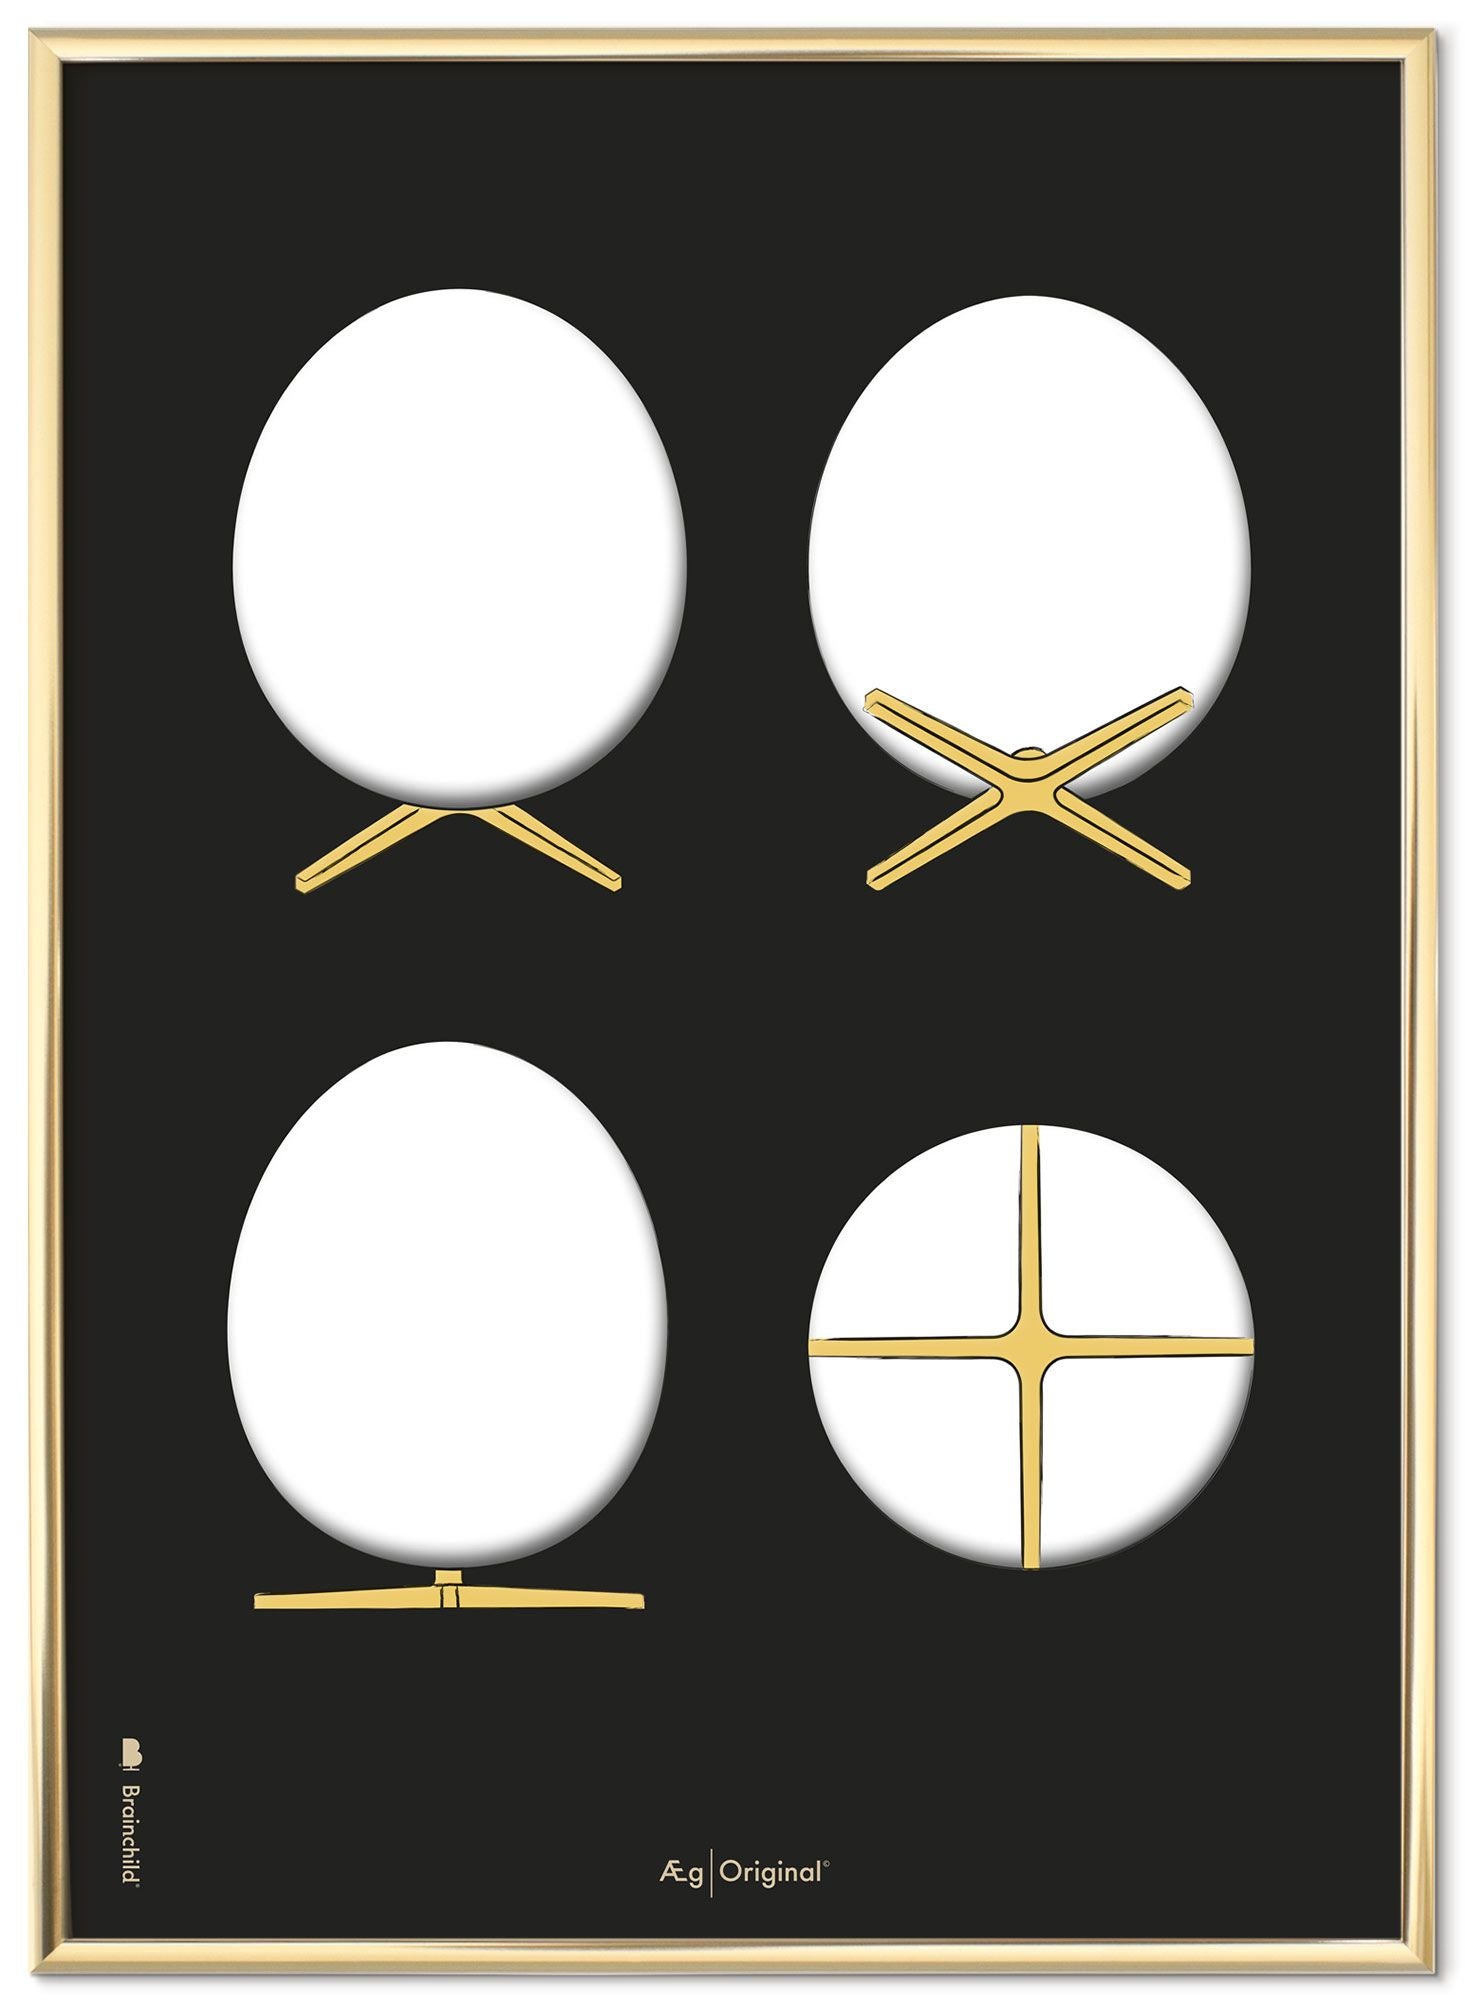 Brainchild The Egg Design Sketches Poster Frame Made Of Brass Colored Metal 30x40 Cm, Black Background